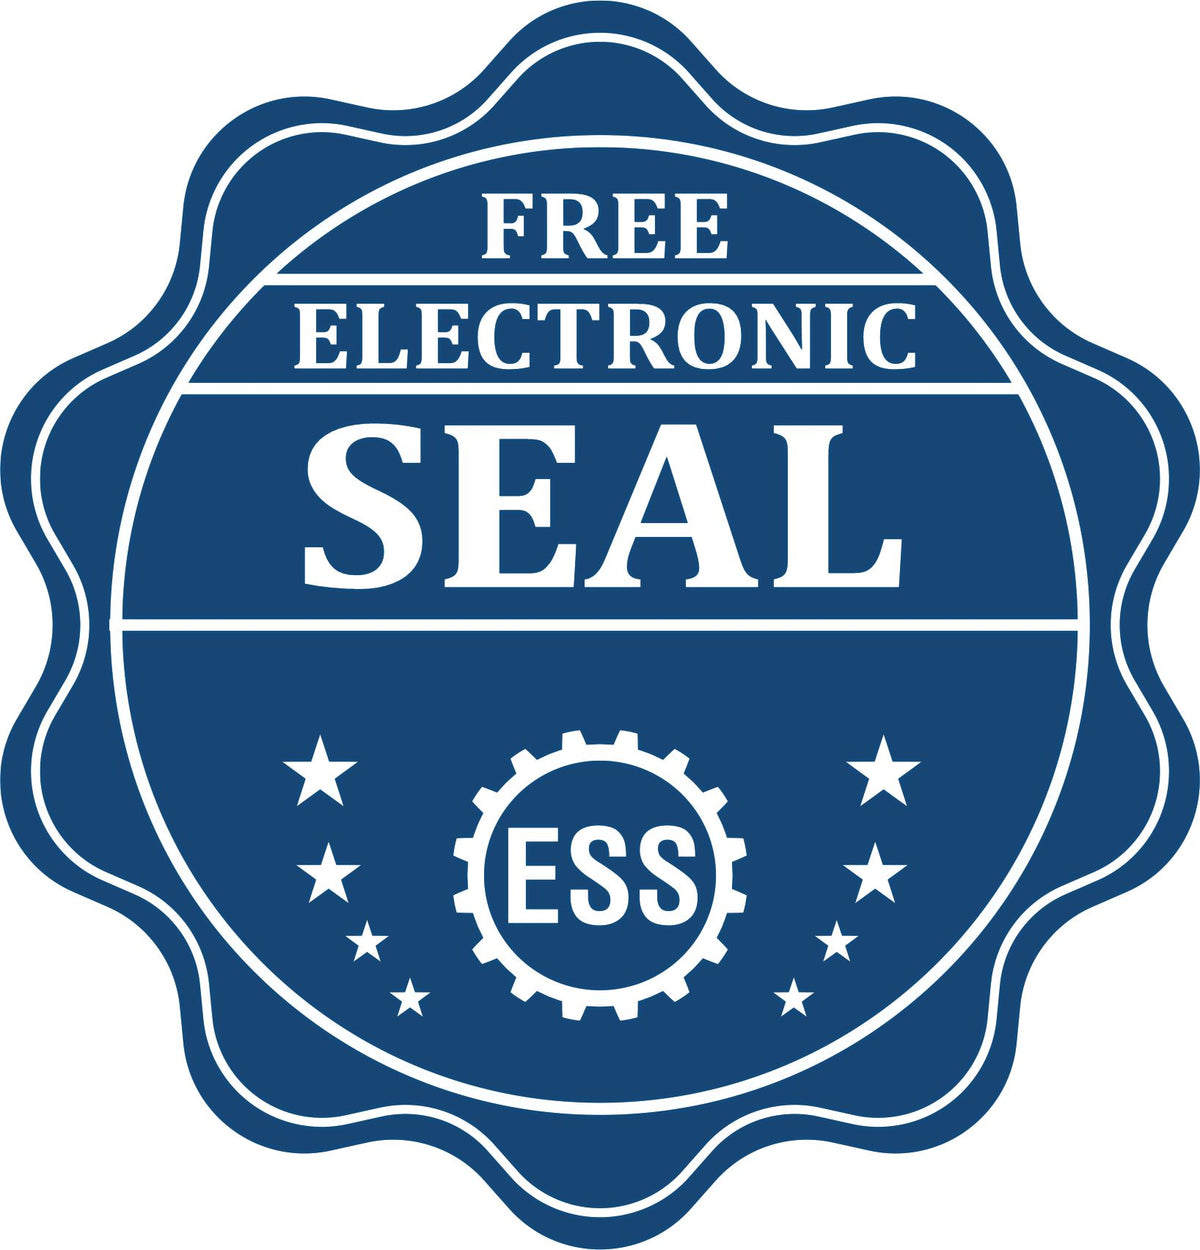 A badge showing a free electronic seal for the Slim Pre-Inked Florida Land Surveyor Seal Stamp with stars and the ESS gear on the emblem.